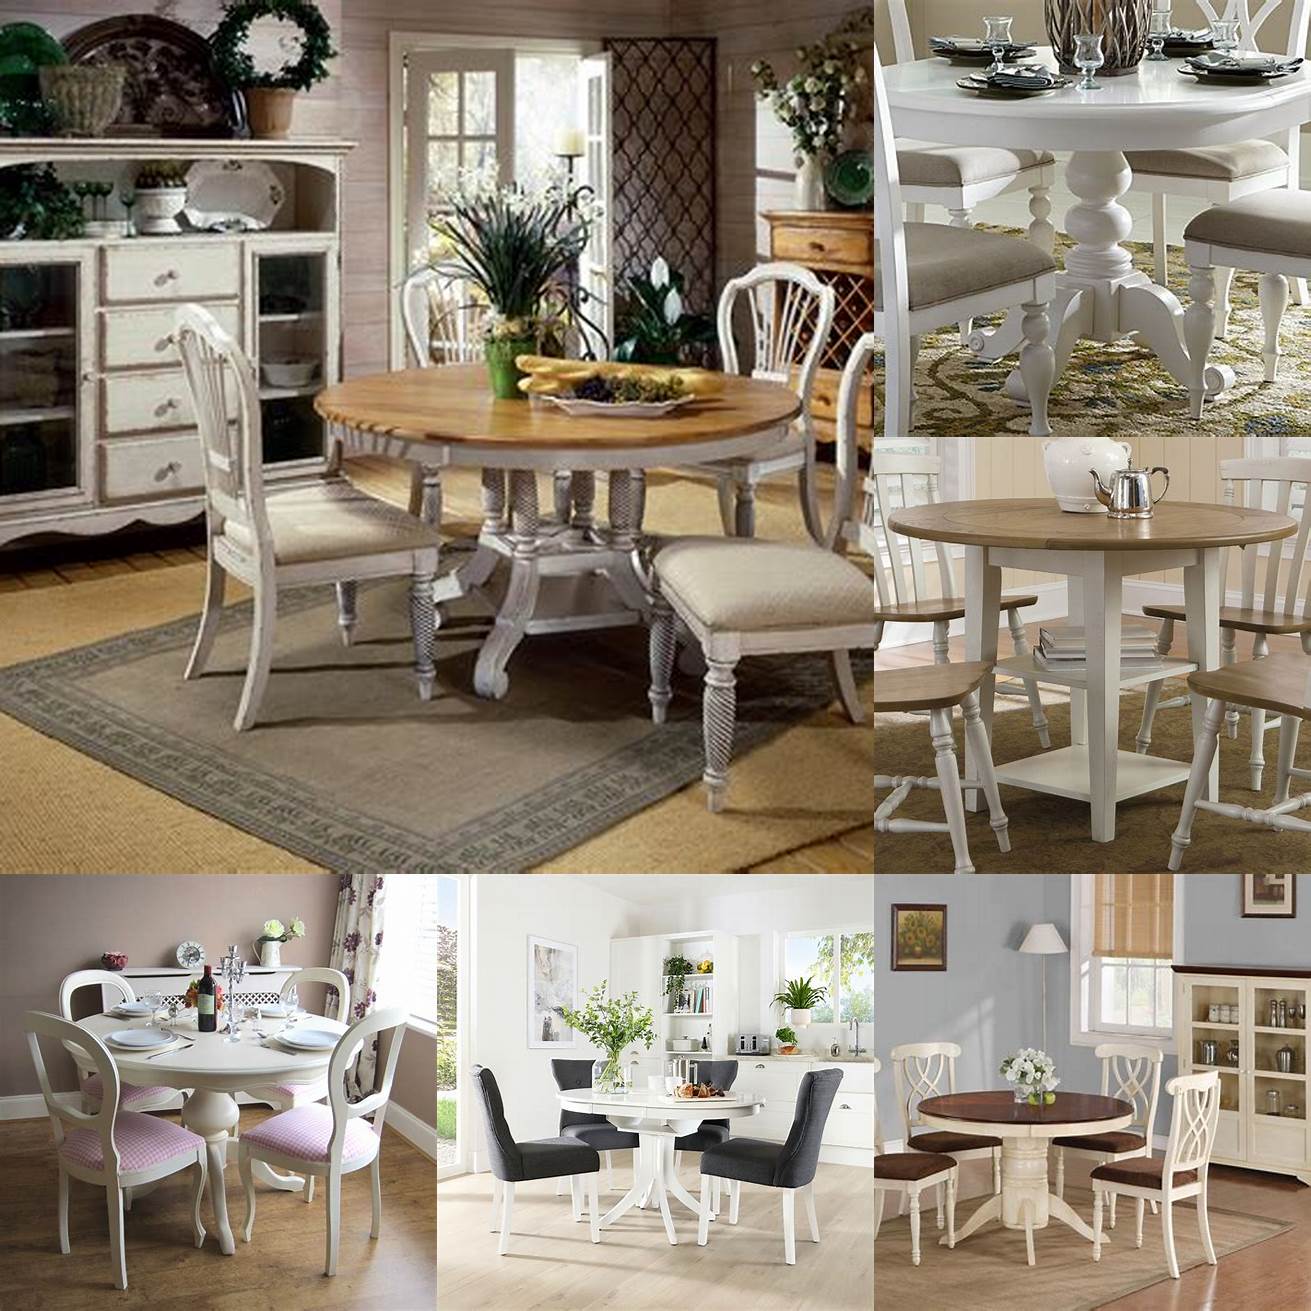 A white round kitchen table with a drawer for storage